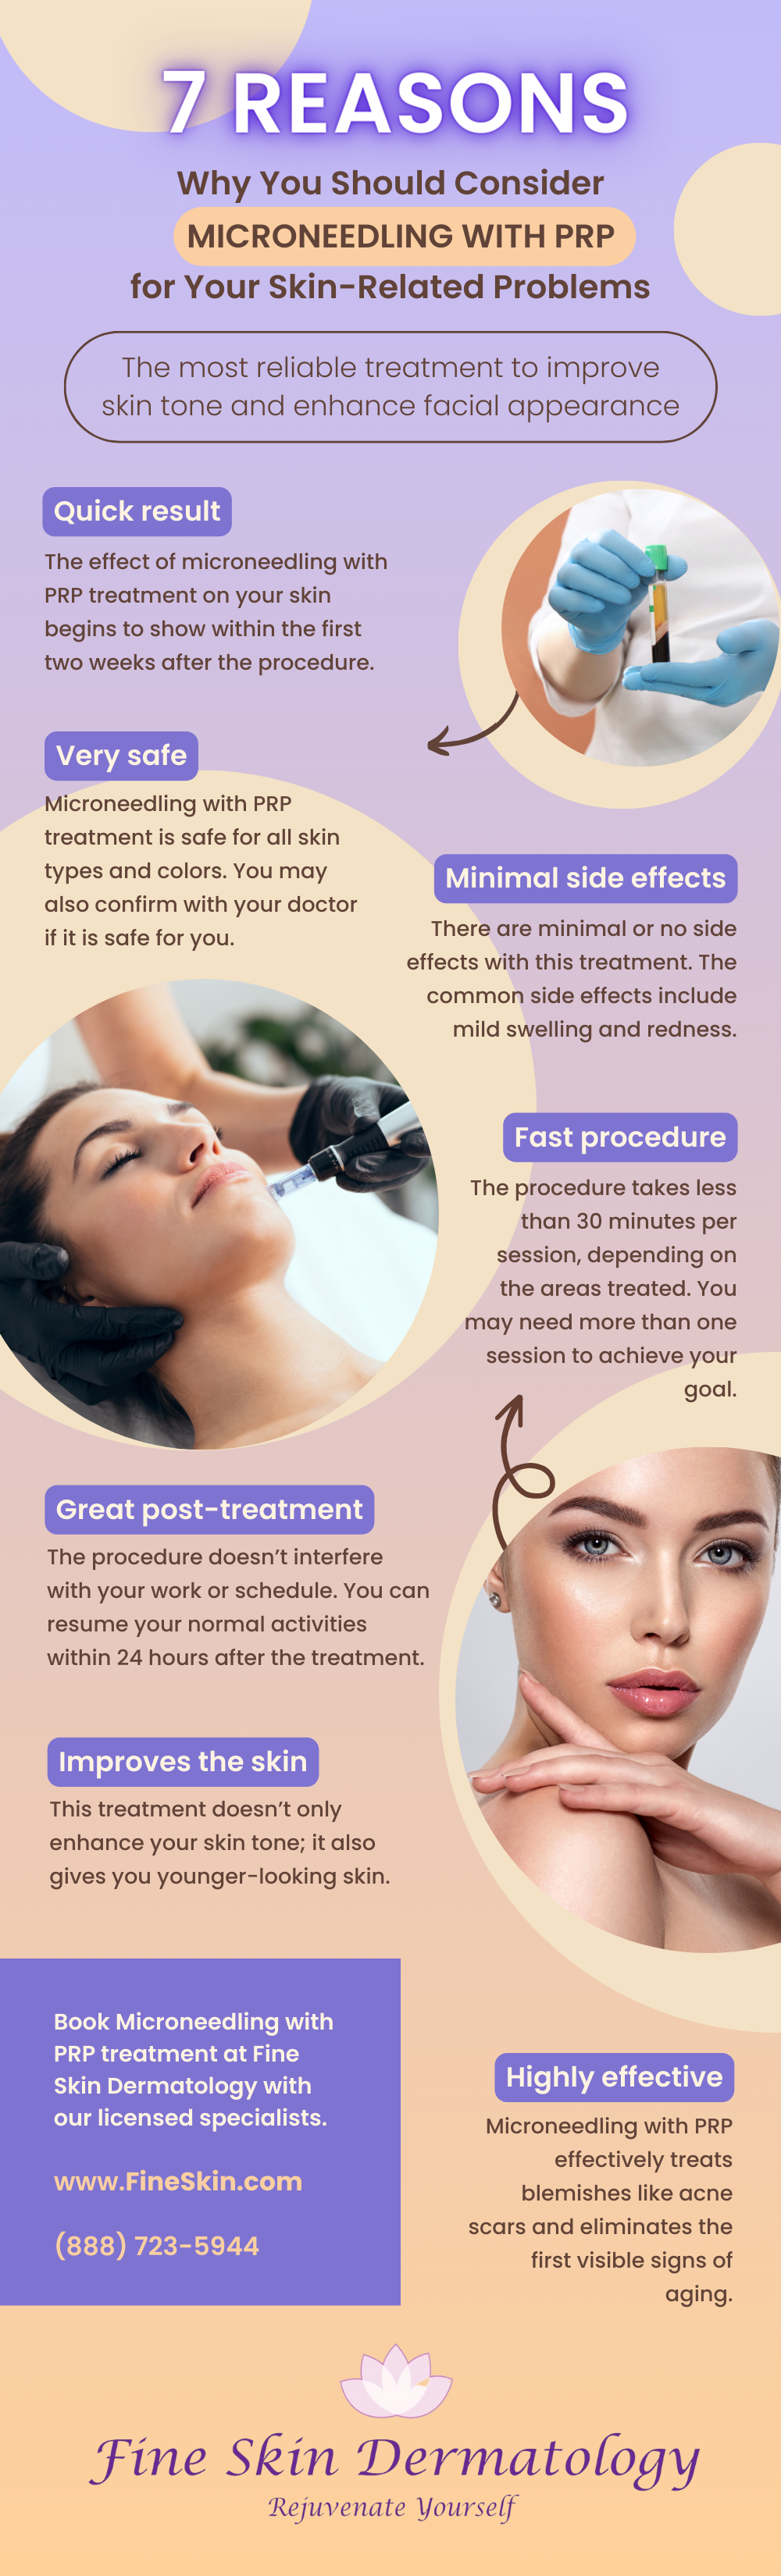 Microneedling with PRP near me